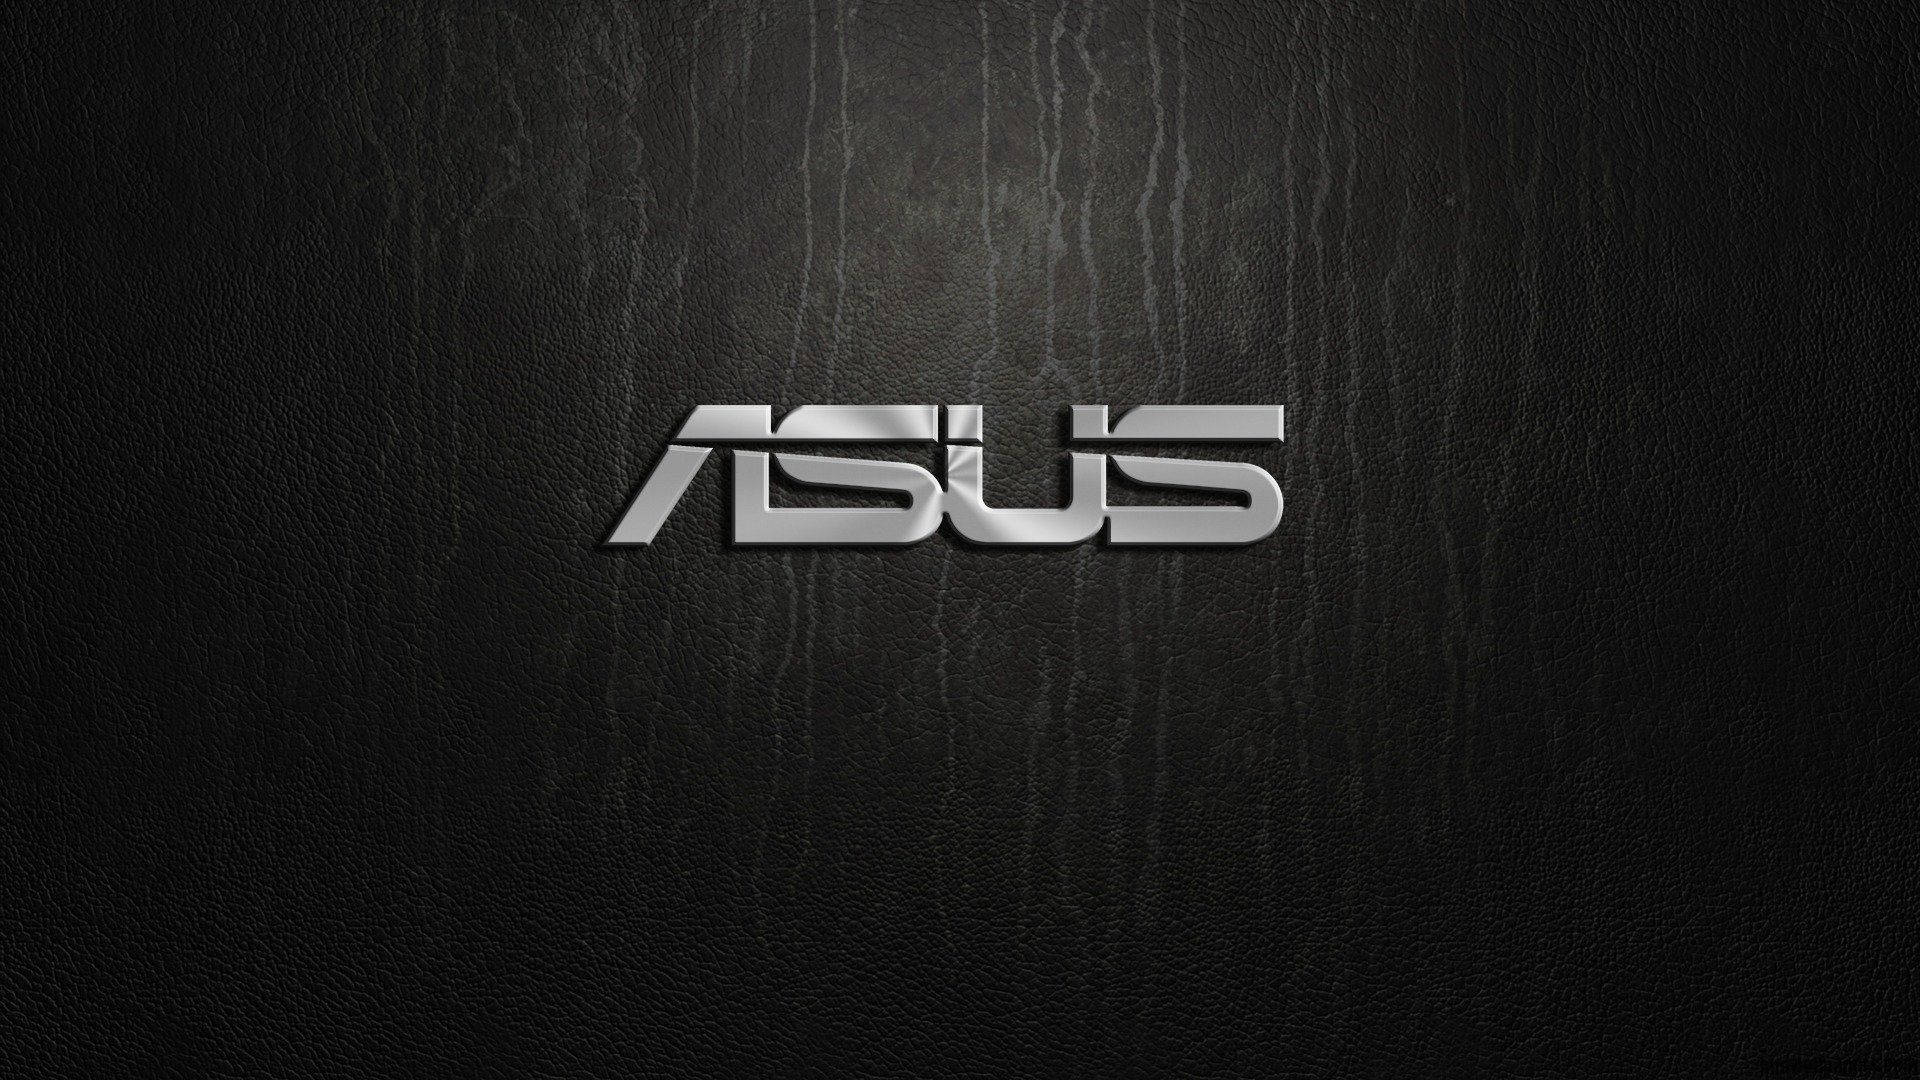 The official logo of Asus, a premium brand of electronics. Wallpaper